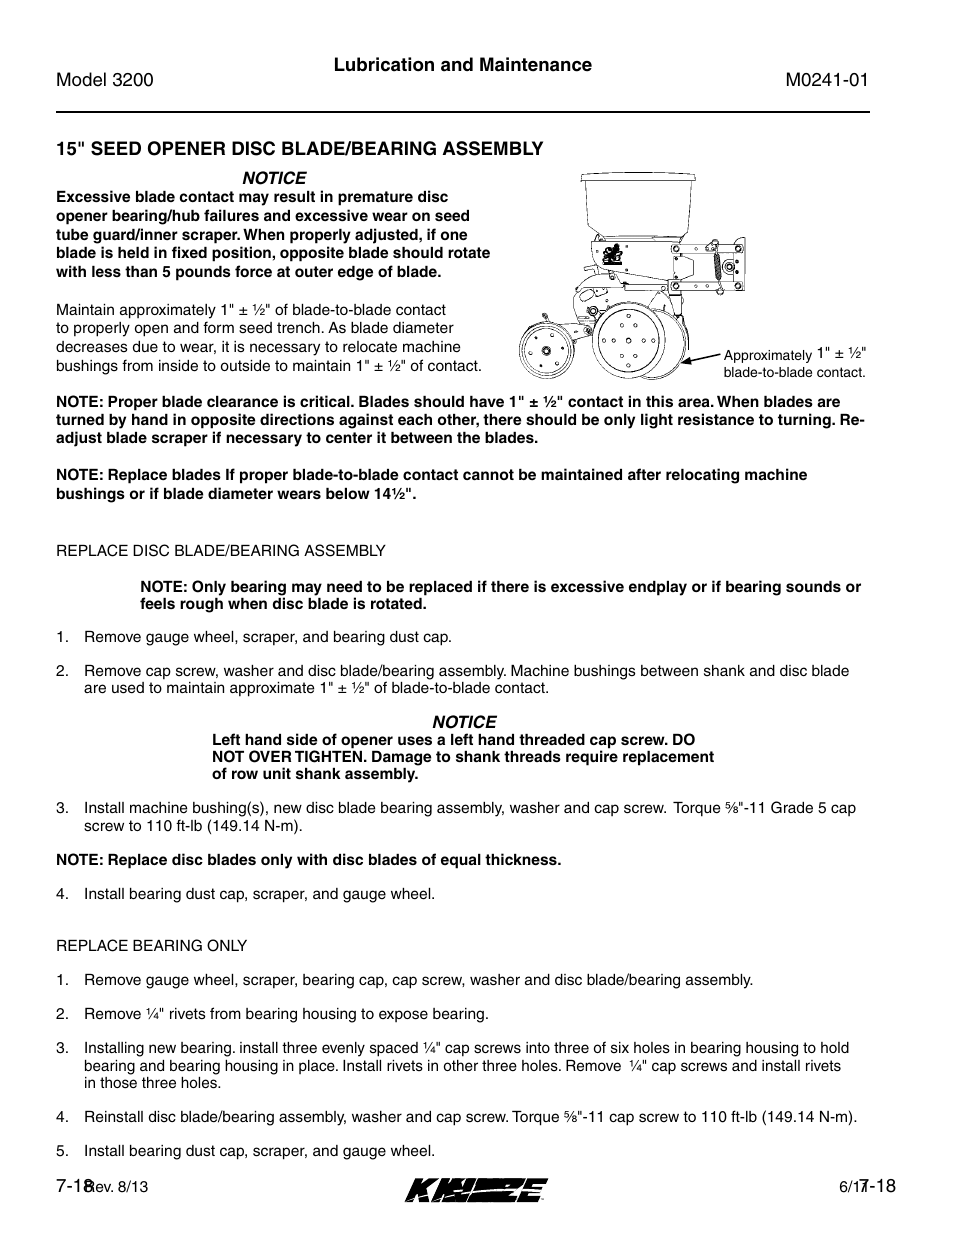 15" seed opener disc blade/bearing assembly, 15" seed opener disc blade/bearing assembly -18 | Kinze 3200 Wing-Fold Planter Rev. 7/14 User Manual | Page 158 / 192